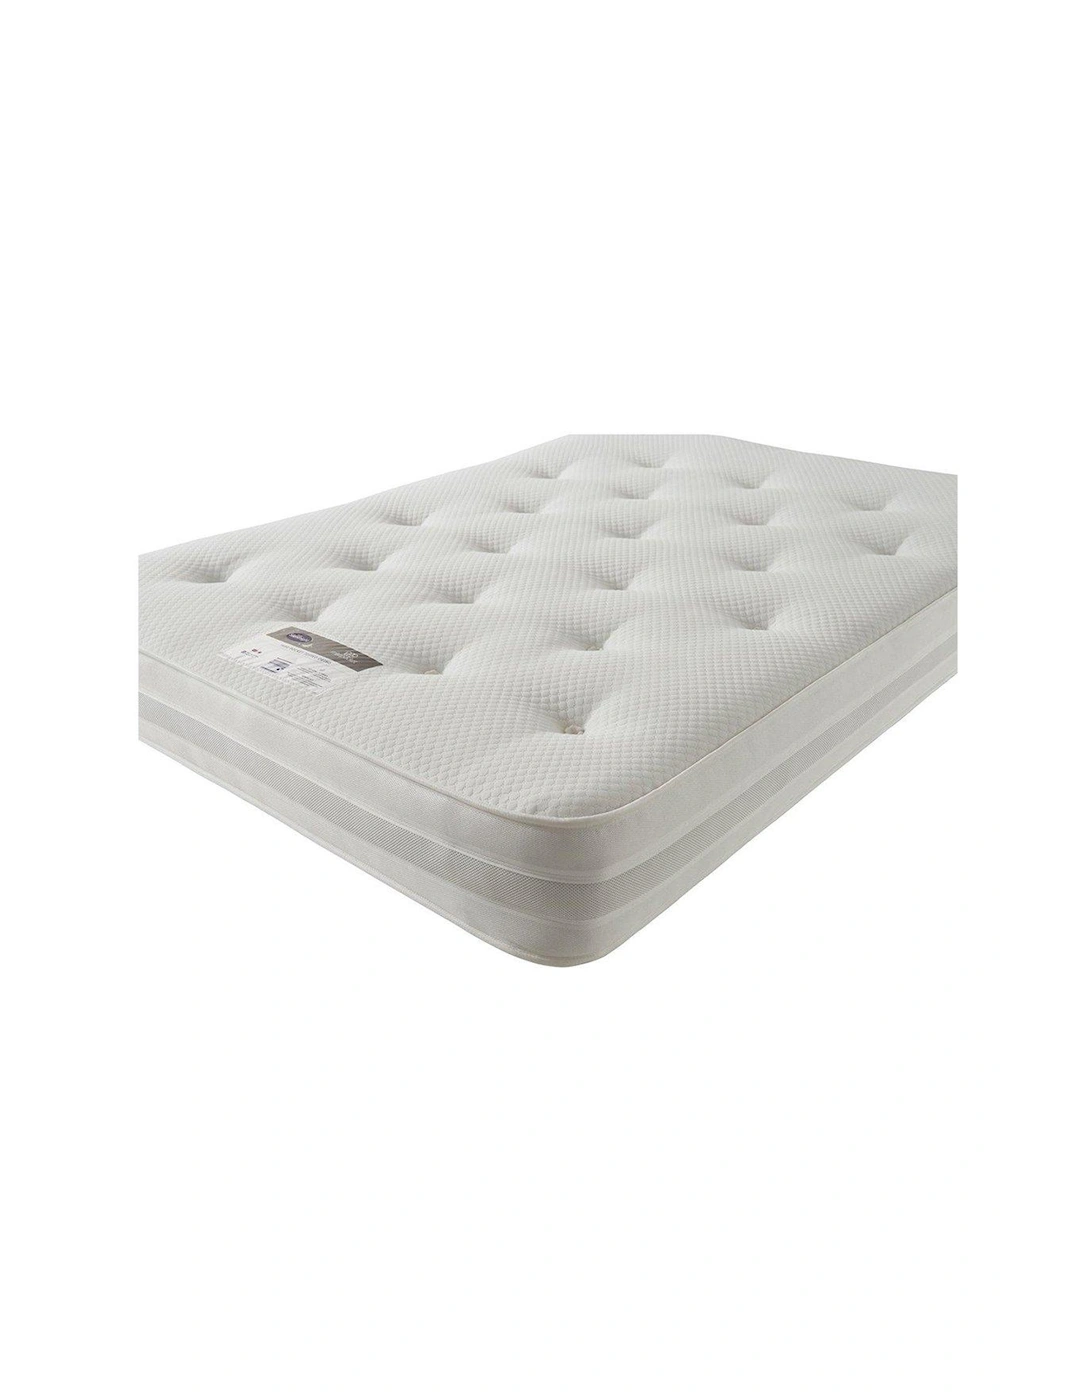 Paige 1400 Pocket Ortho Mattress - Extra Firm